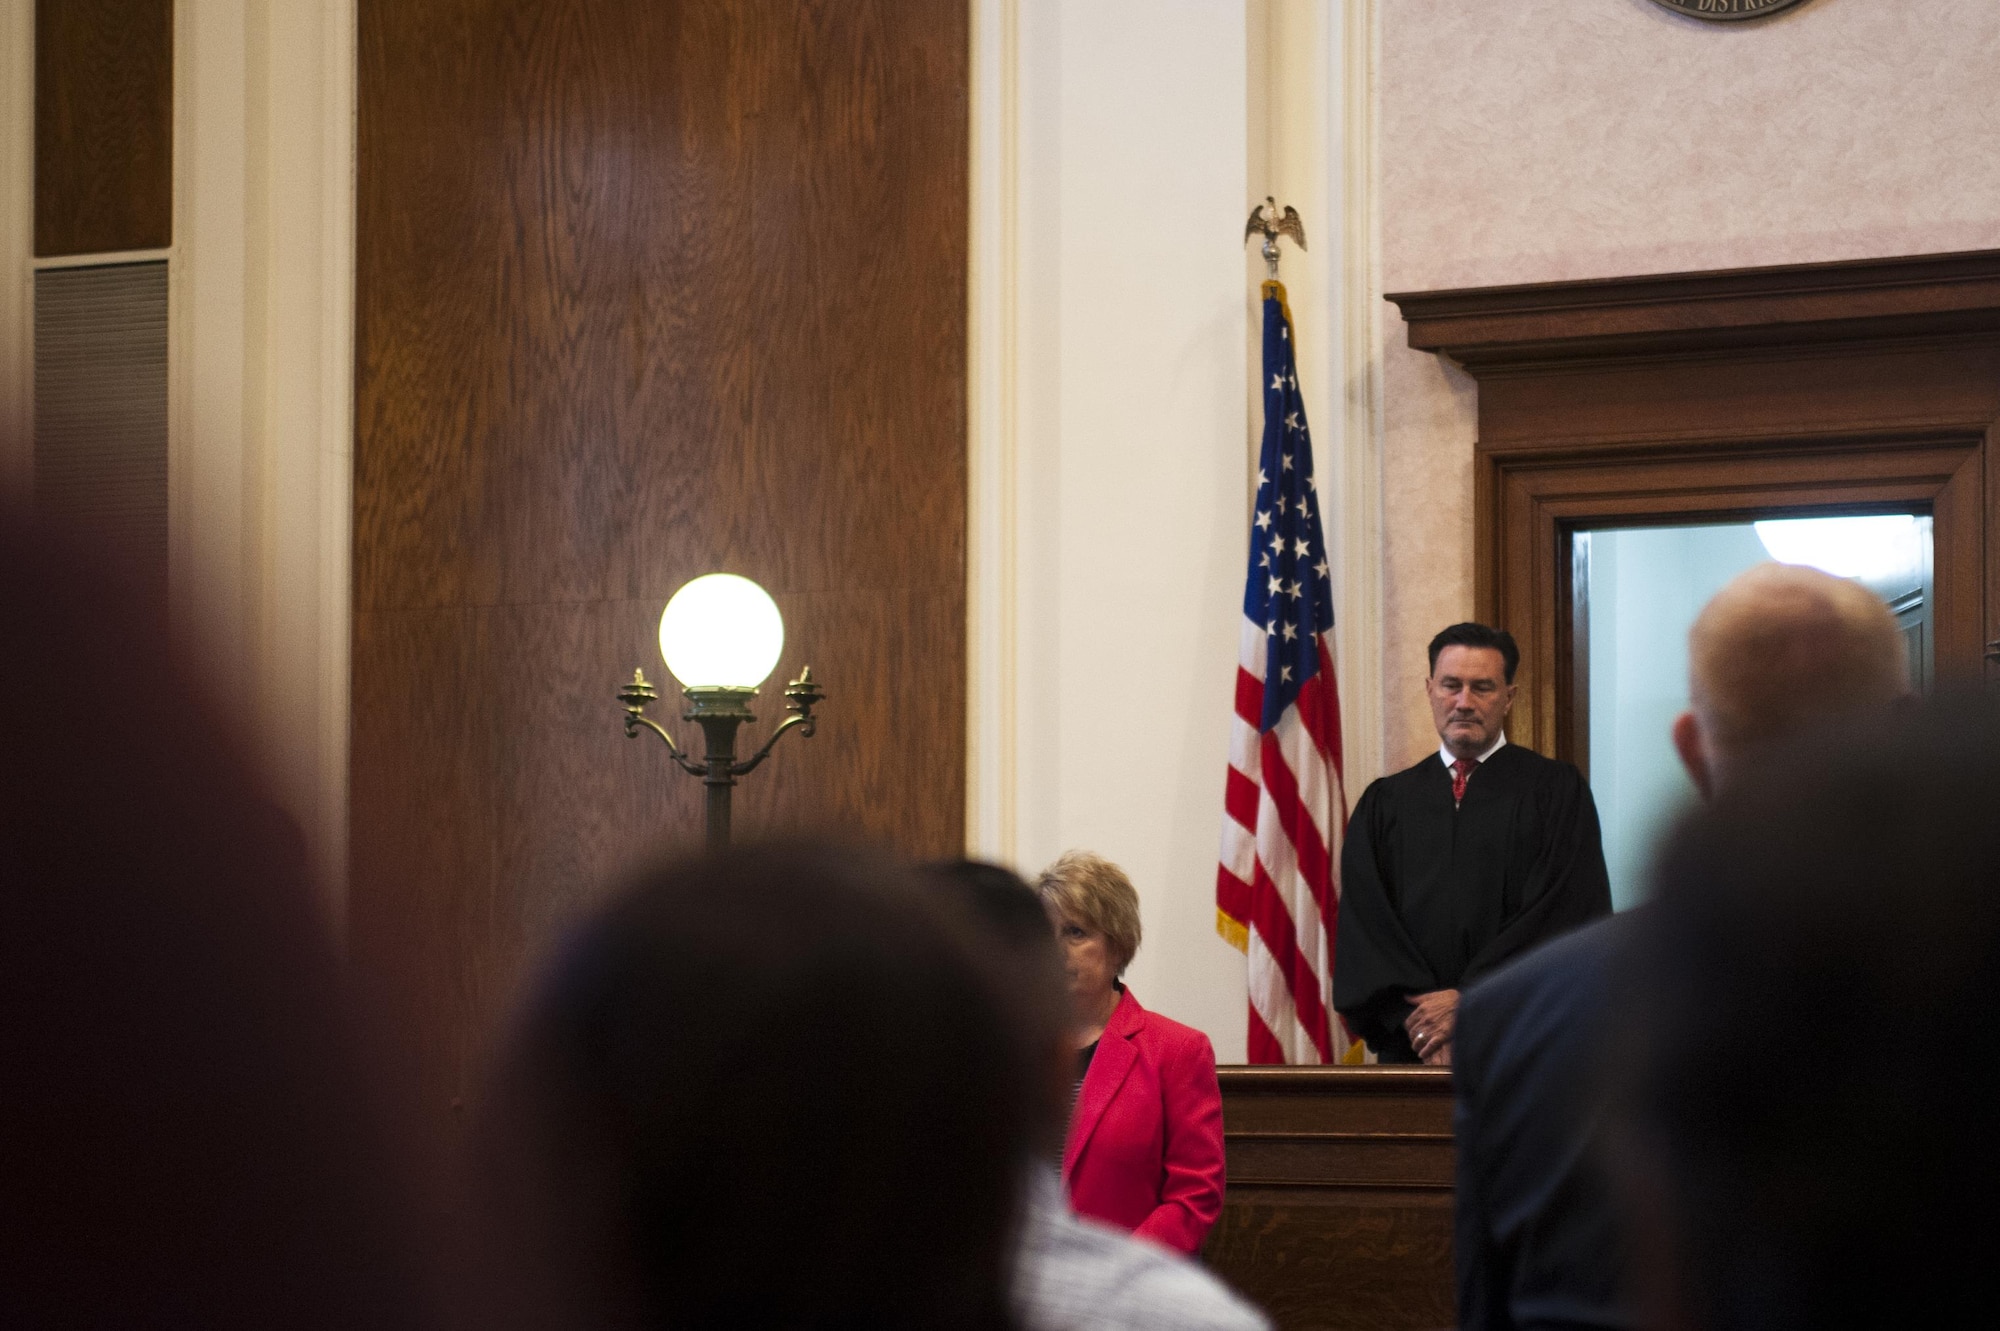 U.S. Magistrate Judge E. Scott Frost, Northern District of Texas San Angelo Division, provides opening remarks for the naturalization ceremony in the O.C. Fisher Building, San Angelo, Texas, June 7, 2017. Frost presided over the ceremony, swearing in 22 new citizens. (U.S. Air Force photo by Senior Airman Scott Jackson/Released)